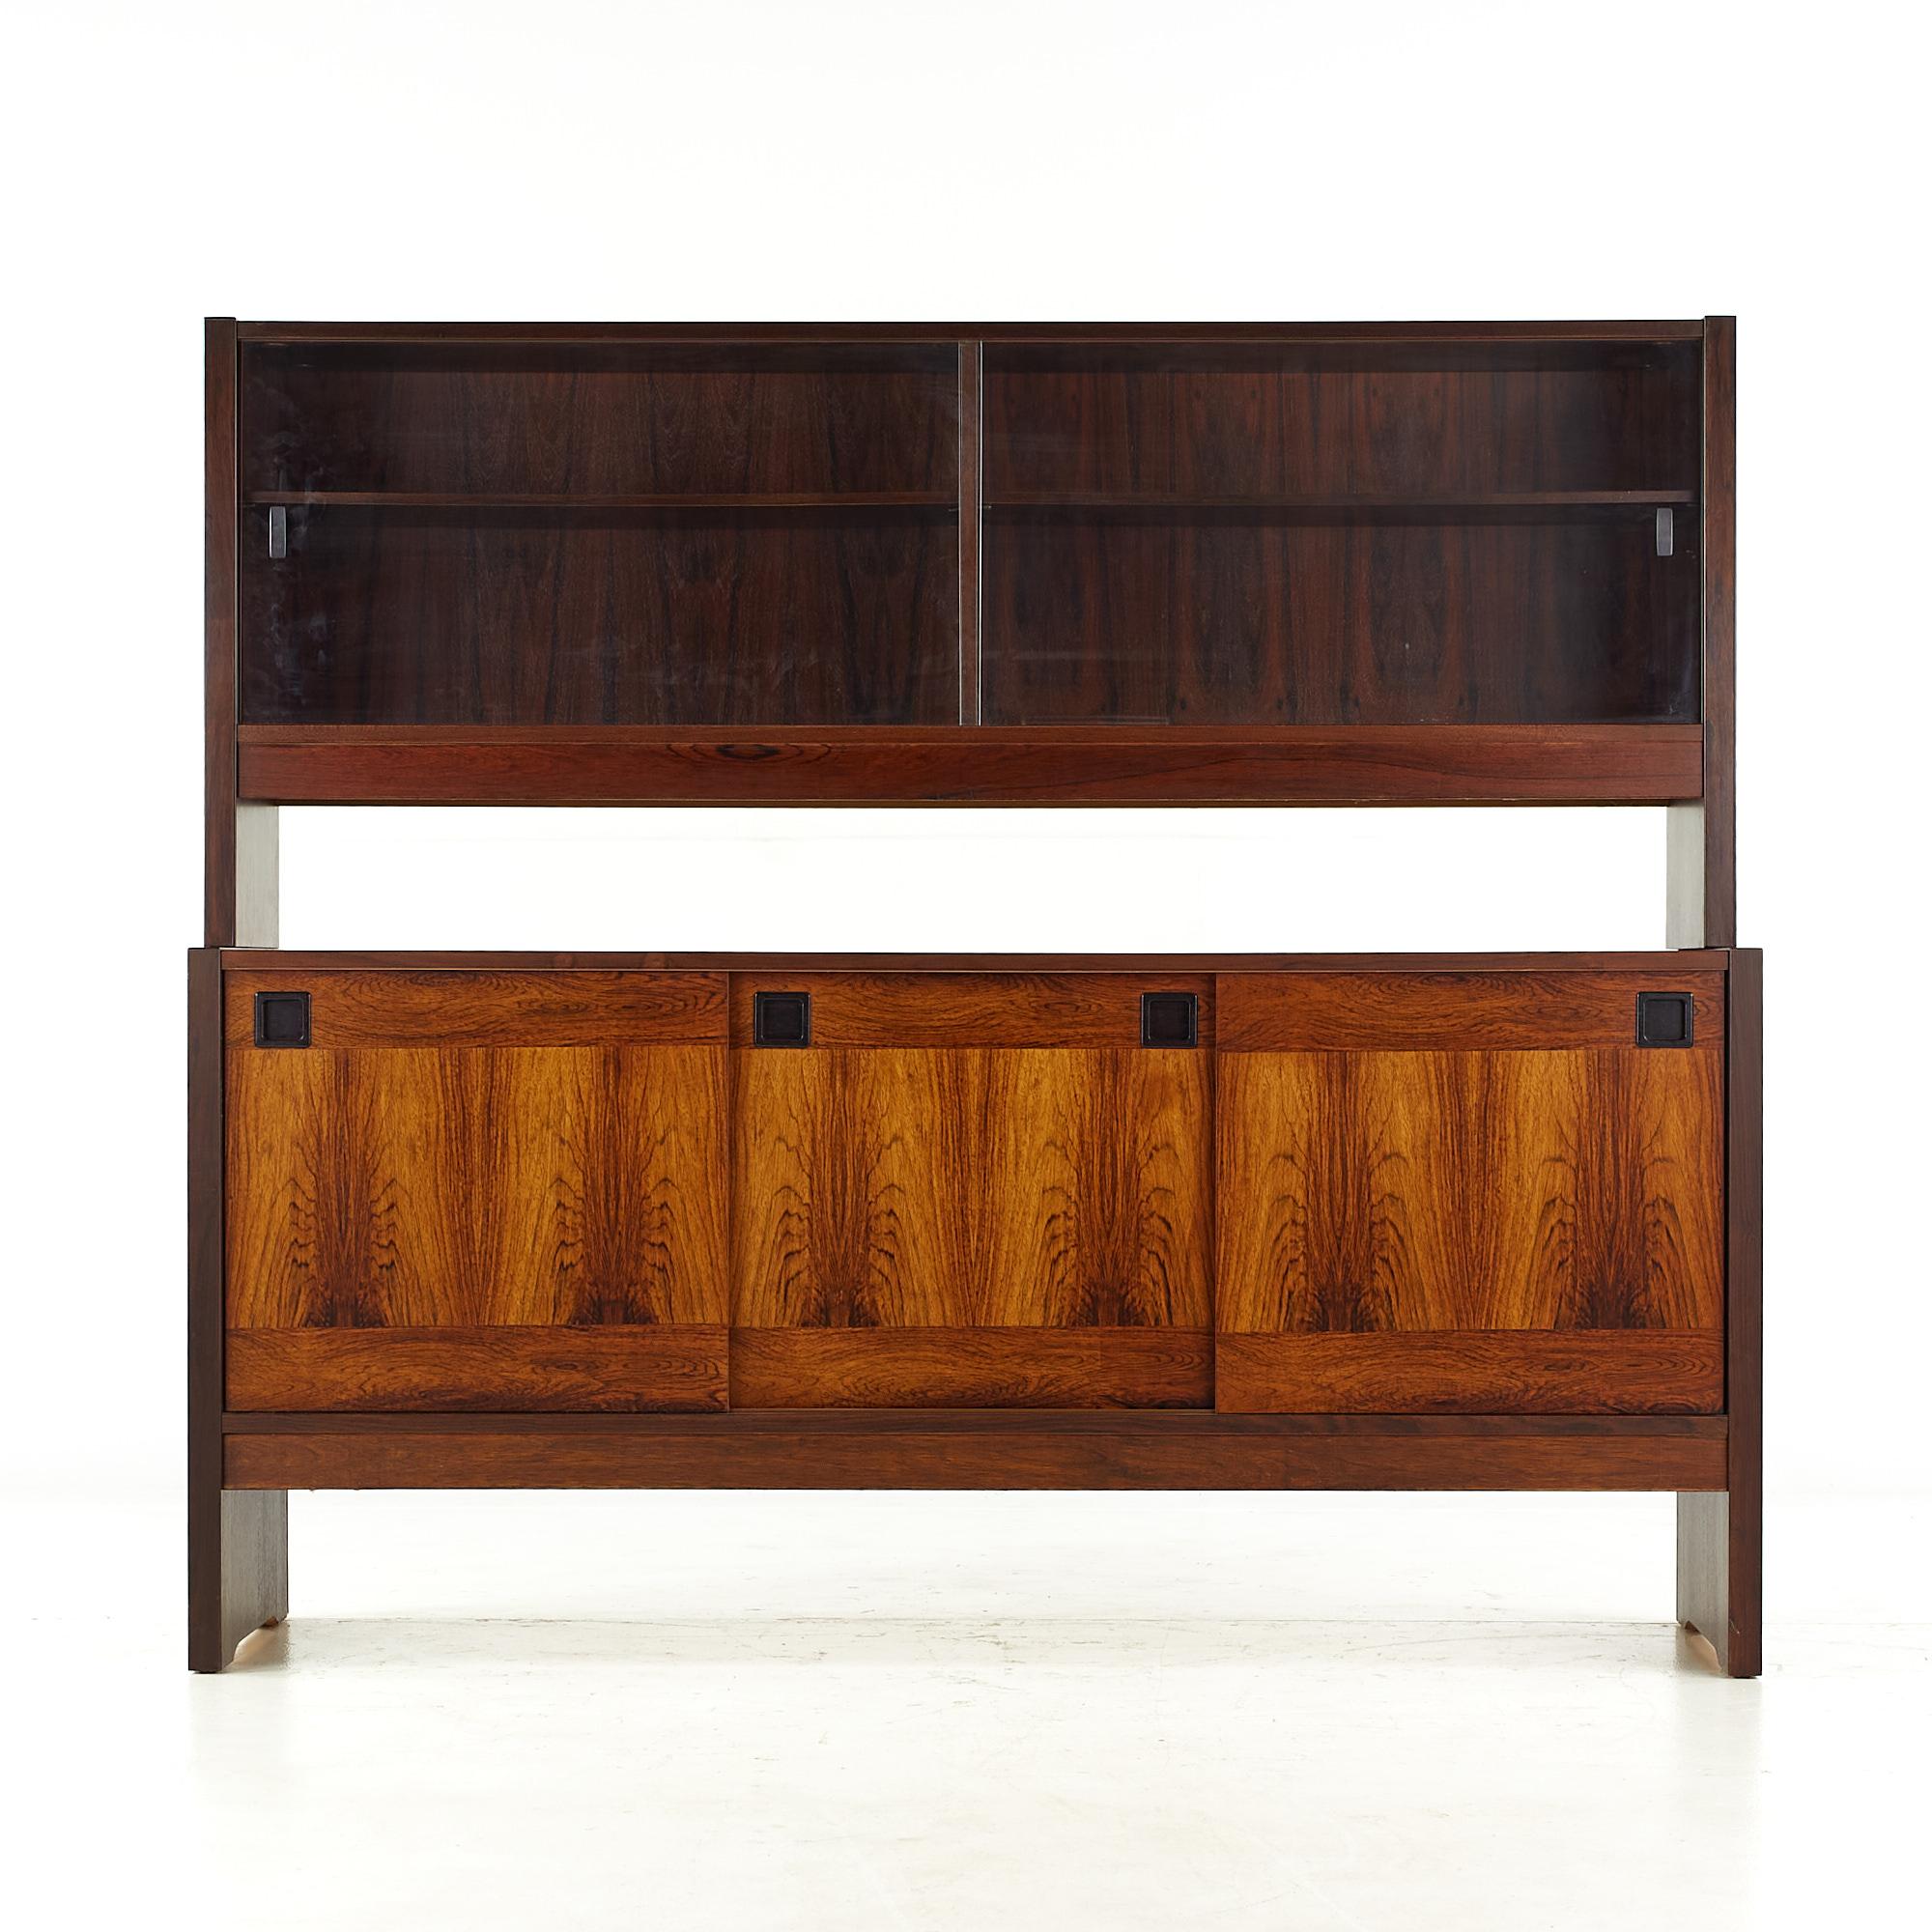 Dyrlund style mid-century rosewood buffet and hutch.

The buffet measures: 64.25 wide x 18 deep x 30 inches high
The hutch measures: 64.25 wide x 12.75 deep x 26.5 inches high
The combined height of the buffet and hutch is 56.5 inches

All